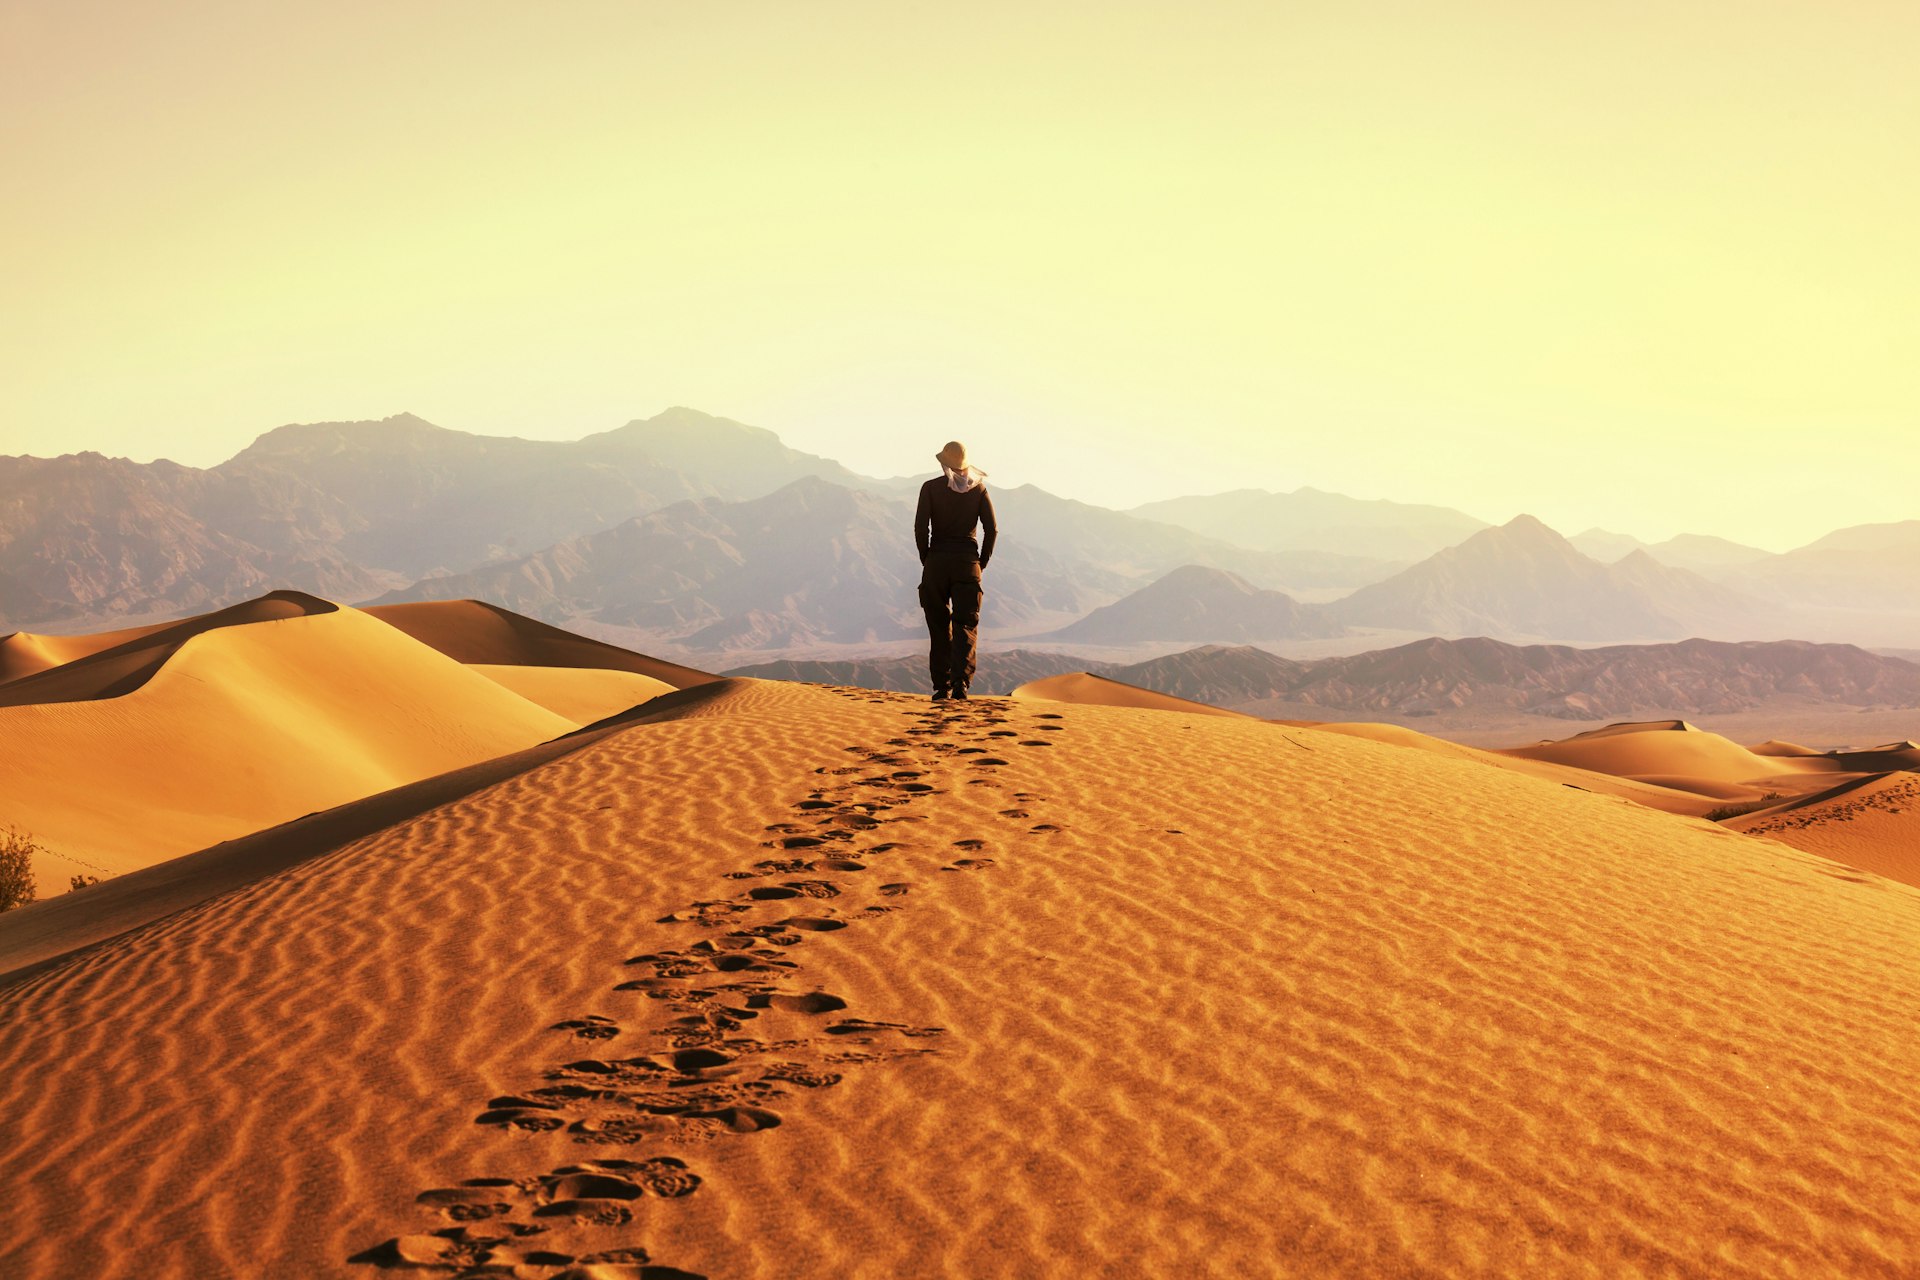 A person walks along the top of a sand dune in a desert